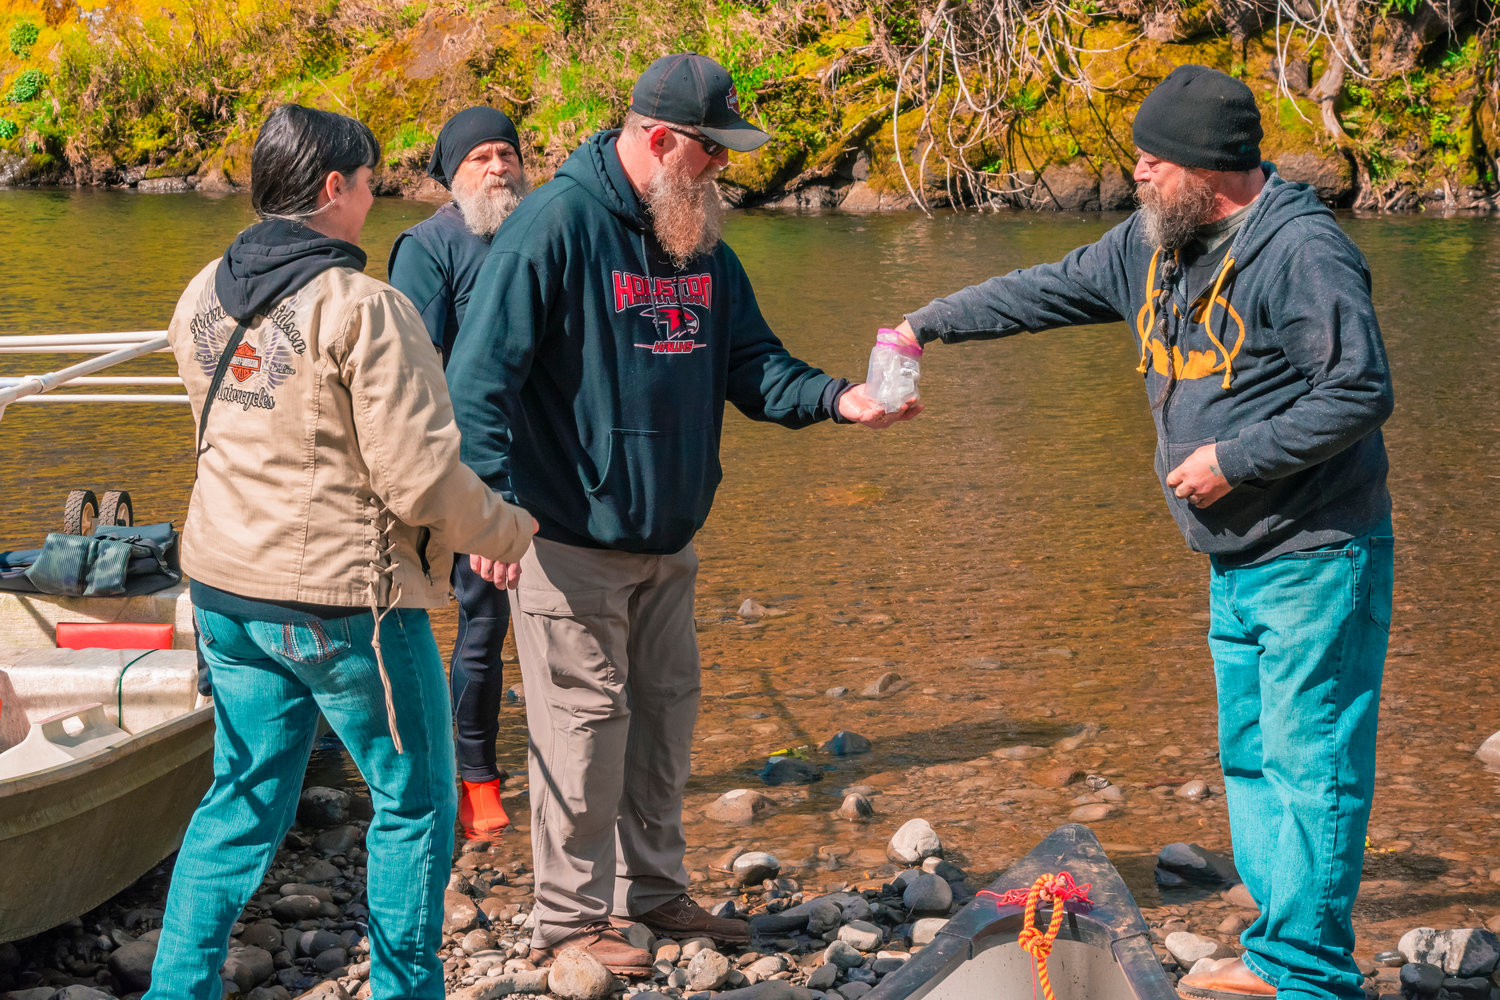 Ashes of Terry ‘Klarantz’ Ware, one of the original river runners, were distibuted into the Chehalis River before the Pe Ell River Run on Saturday.